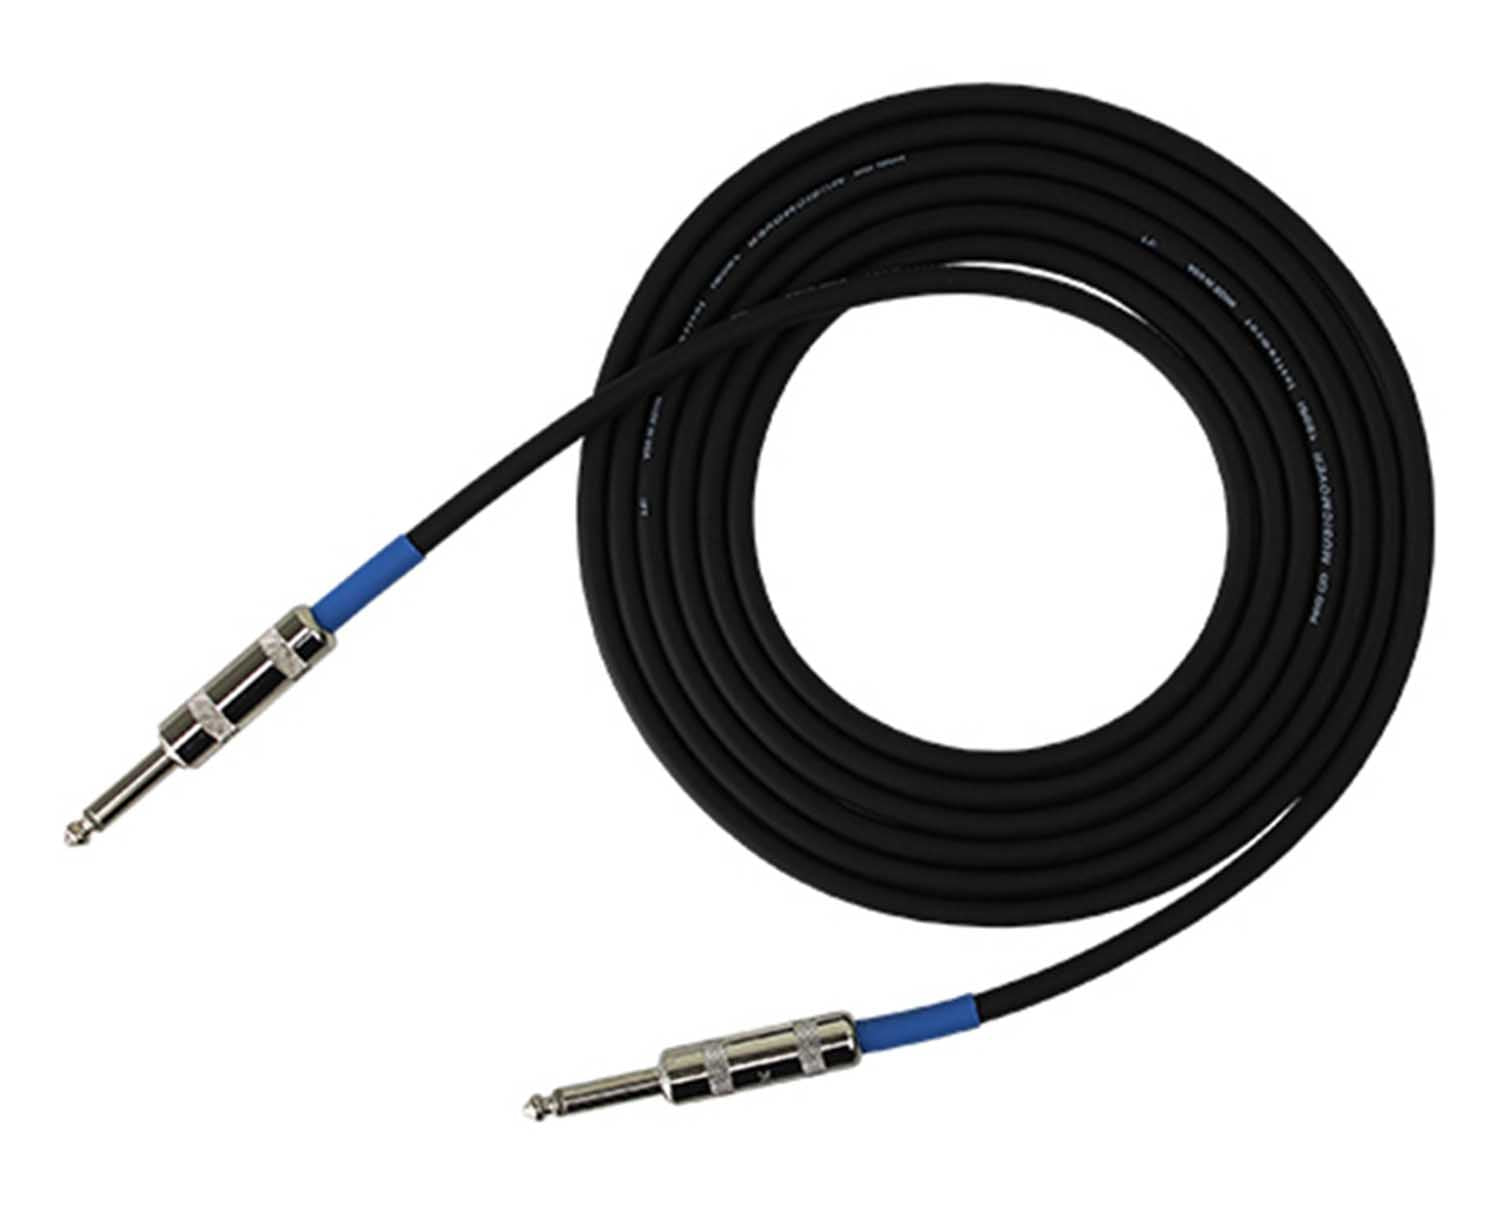 PROCO EG-10 Excellines Series 1/4 Phone Male to 1/4 Phone Male Instrument Cable 10 Foot - Hollywood DJ